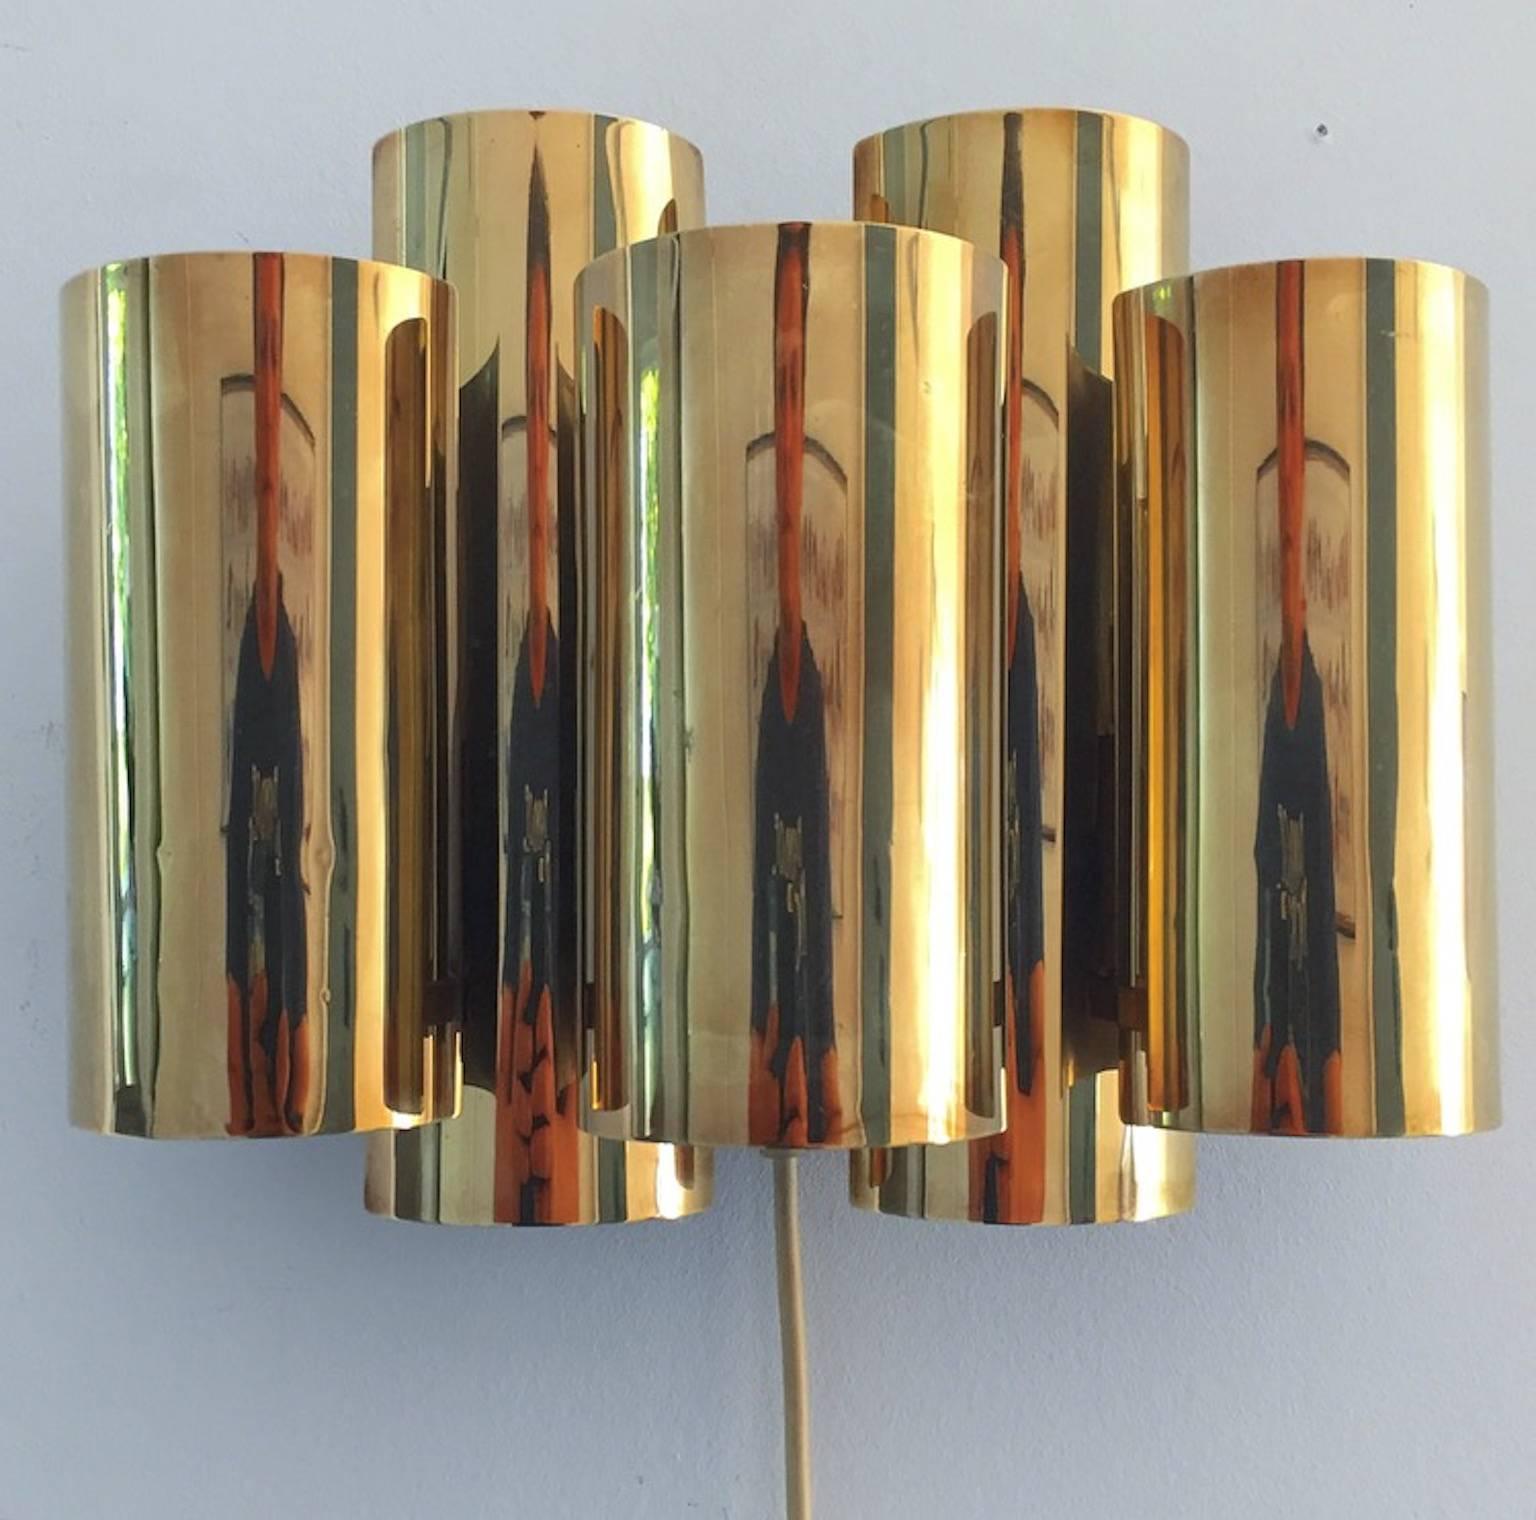 This beautiful brass wall sconce with five cynlidrical shades was designed by Danish light designer Svend Aage Holm Sørensen. 

He is known for his Brutalist lamps but this is a very beautiful elegant lamp from his hand- a rare design indeed from